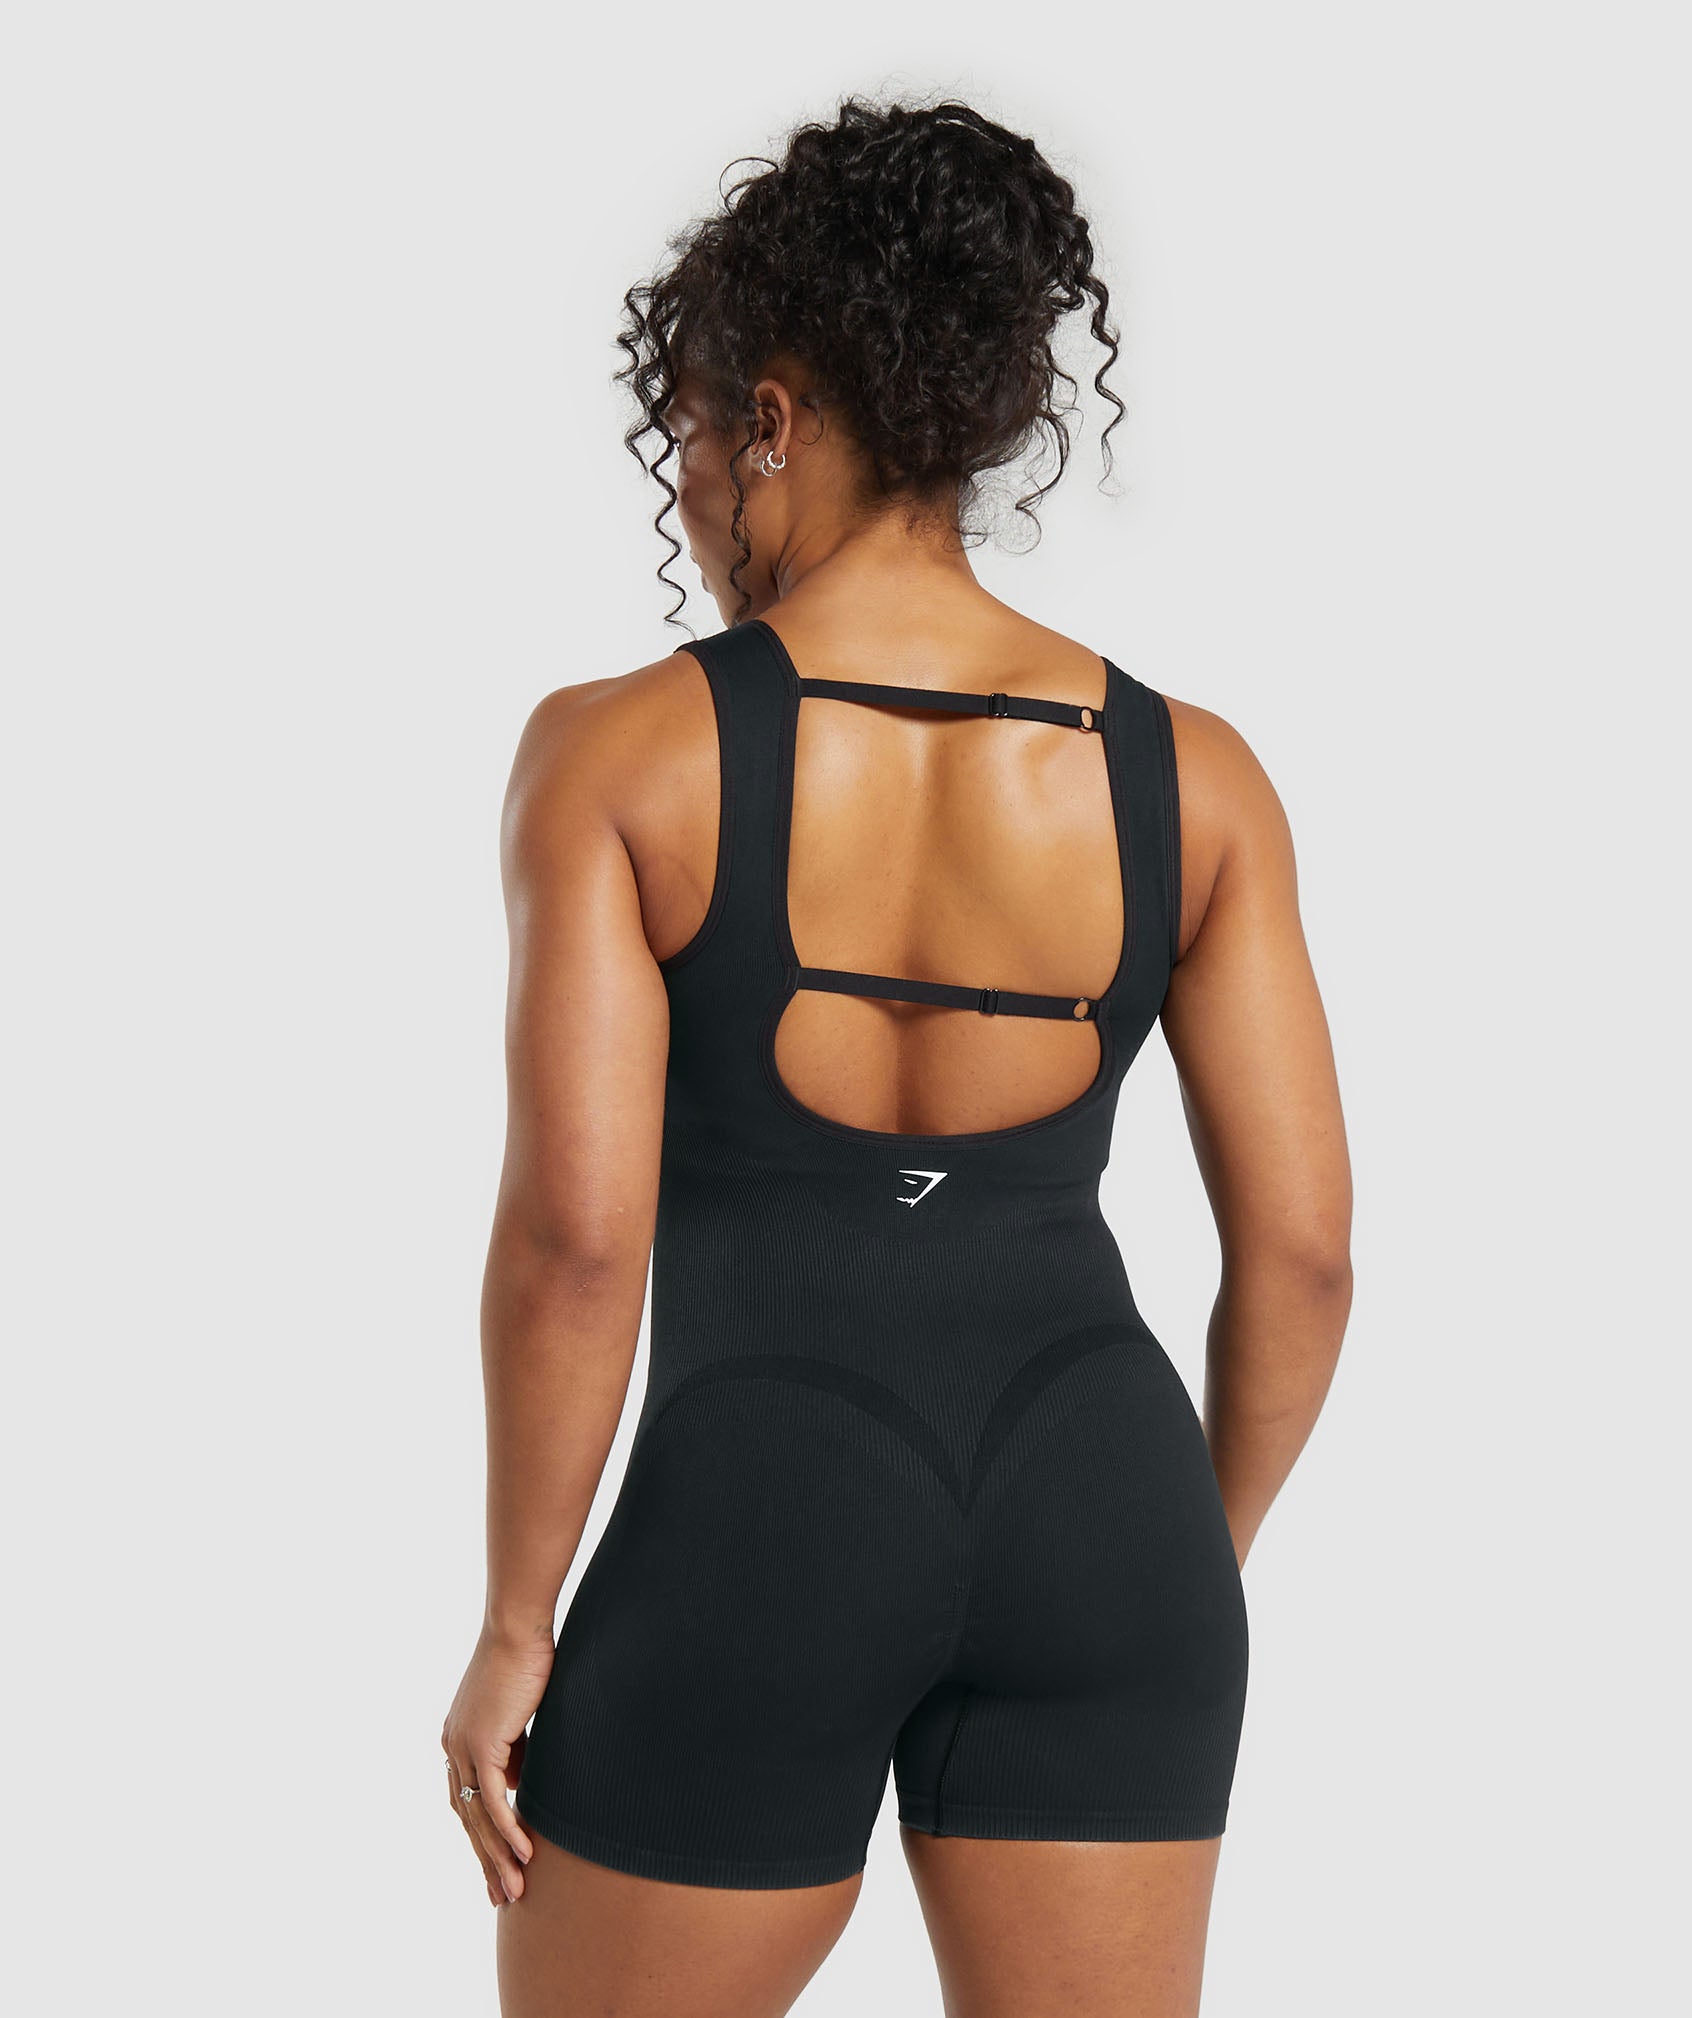 Gains Seamless All-In-One